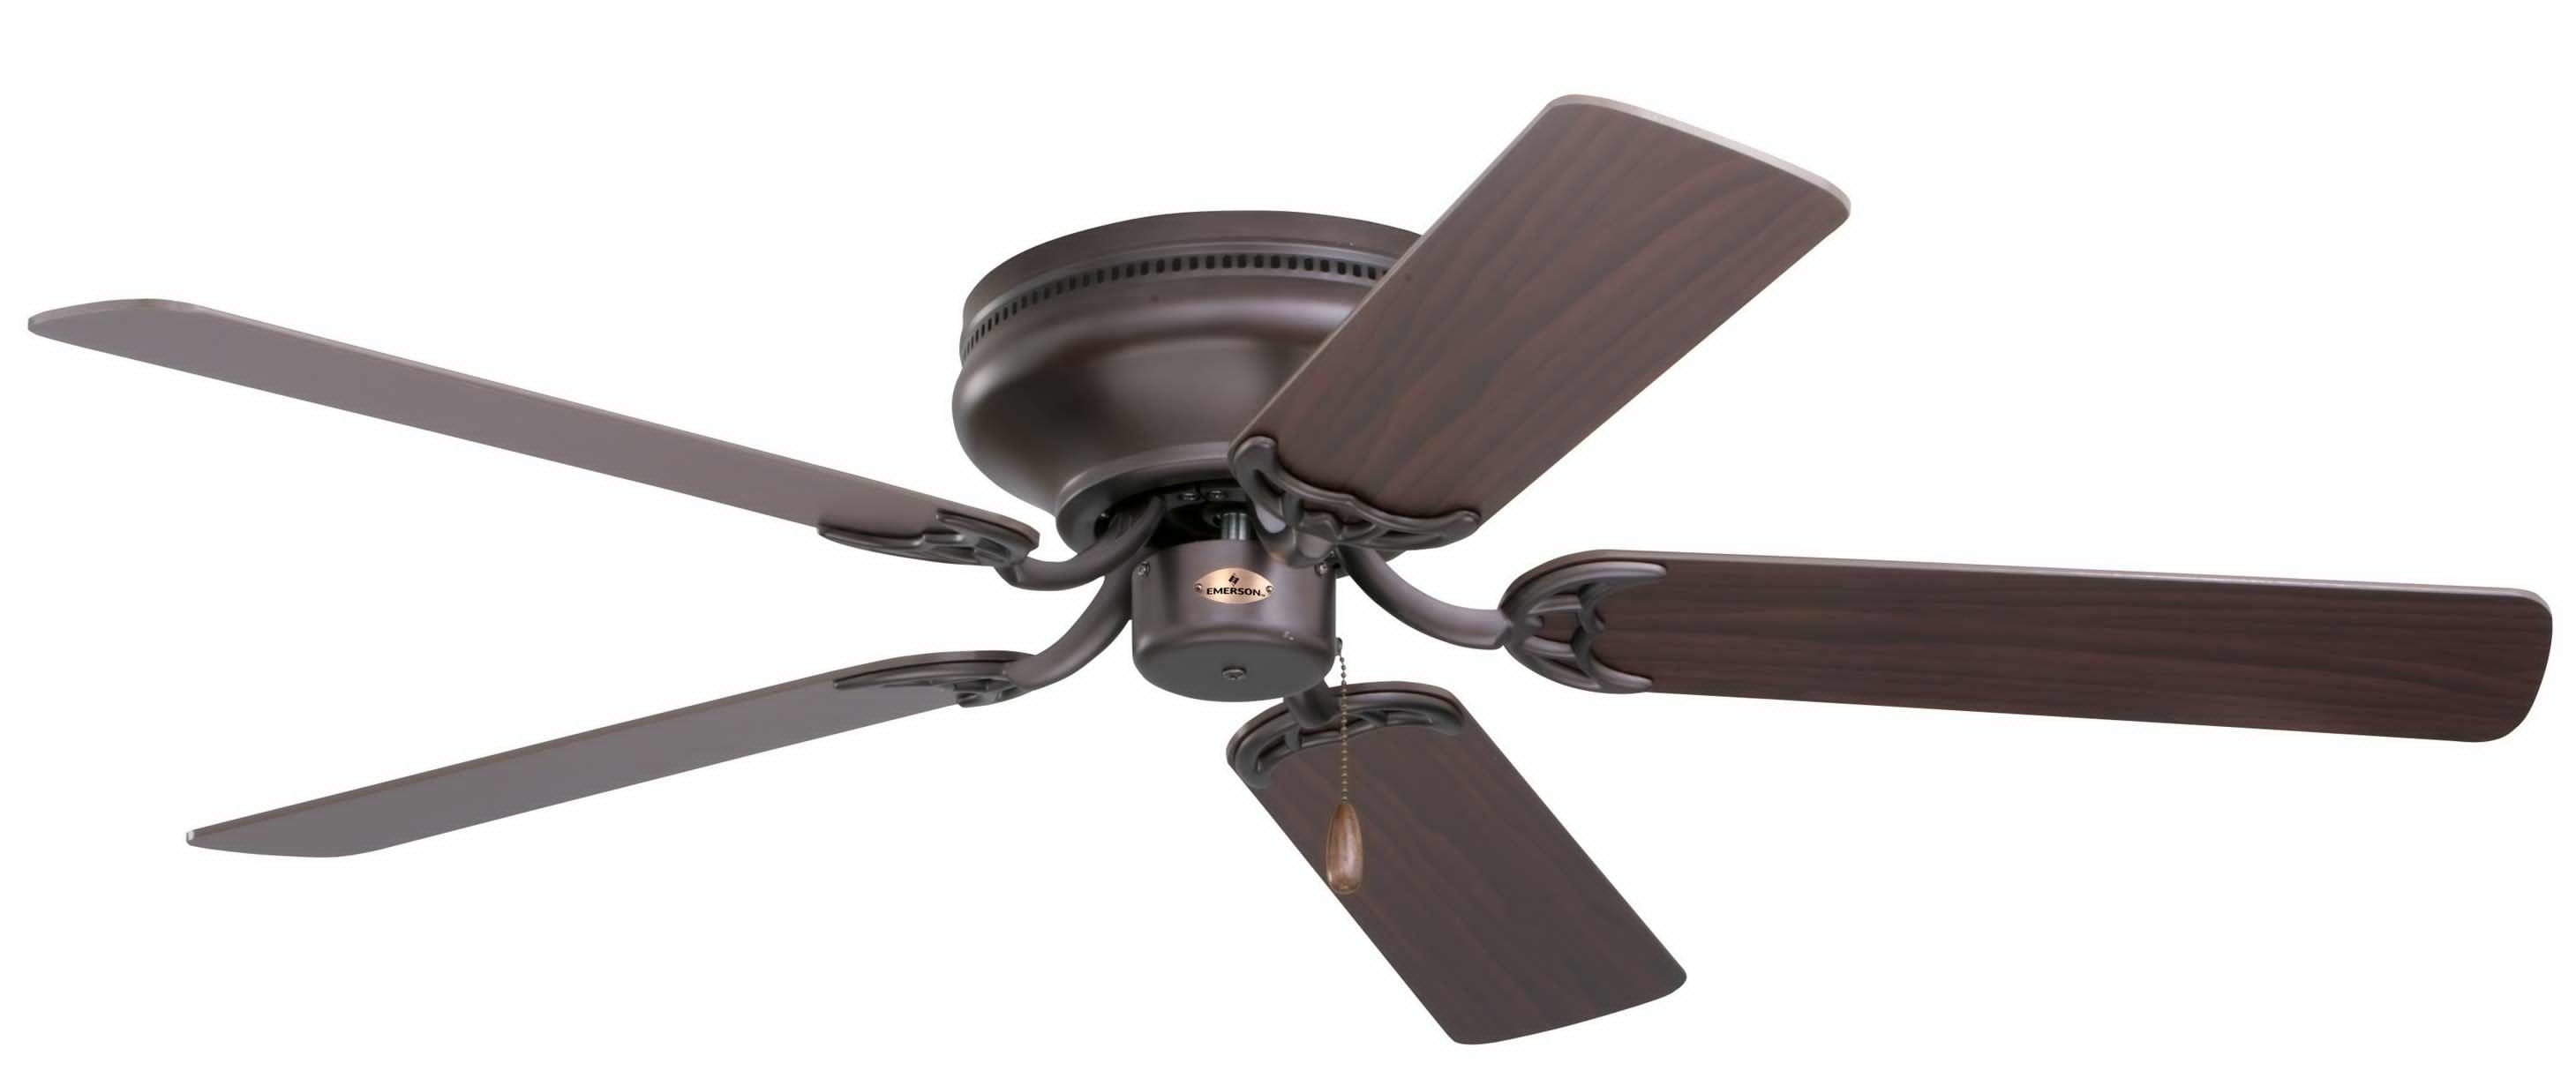 Low Profile Outdoor Ceiling Fans Without Lightsceiling fan ideas astounding low profile ceiling fan without